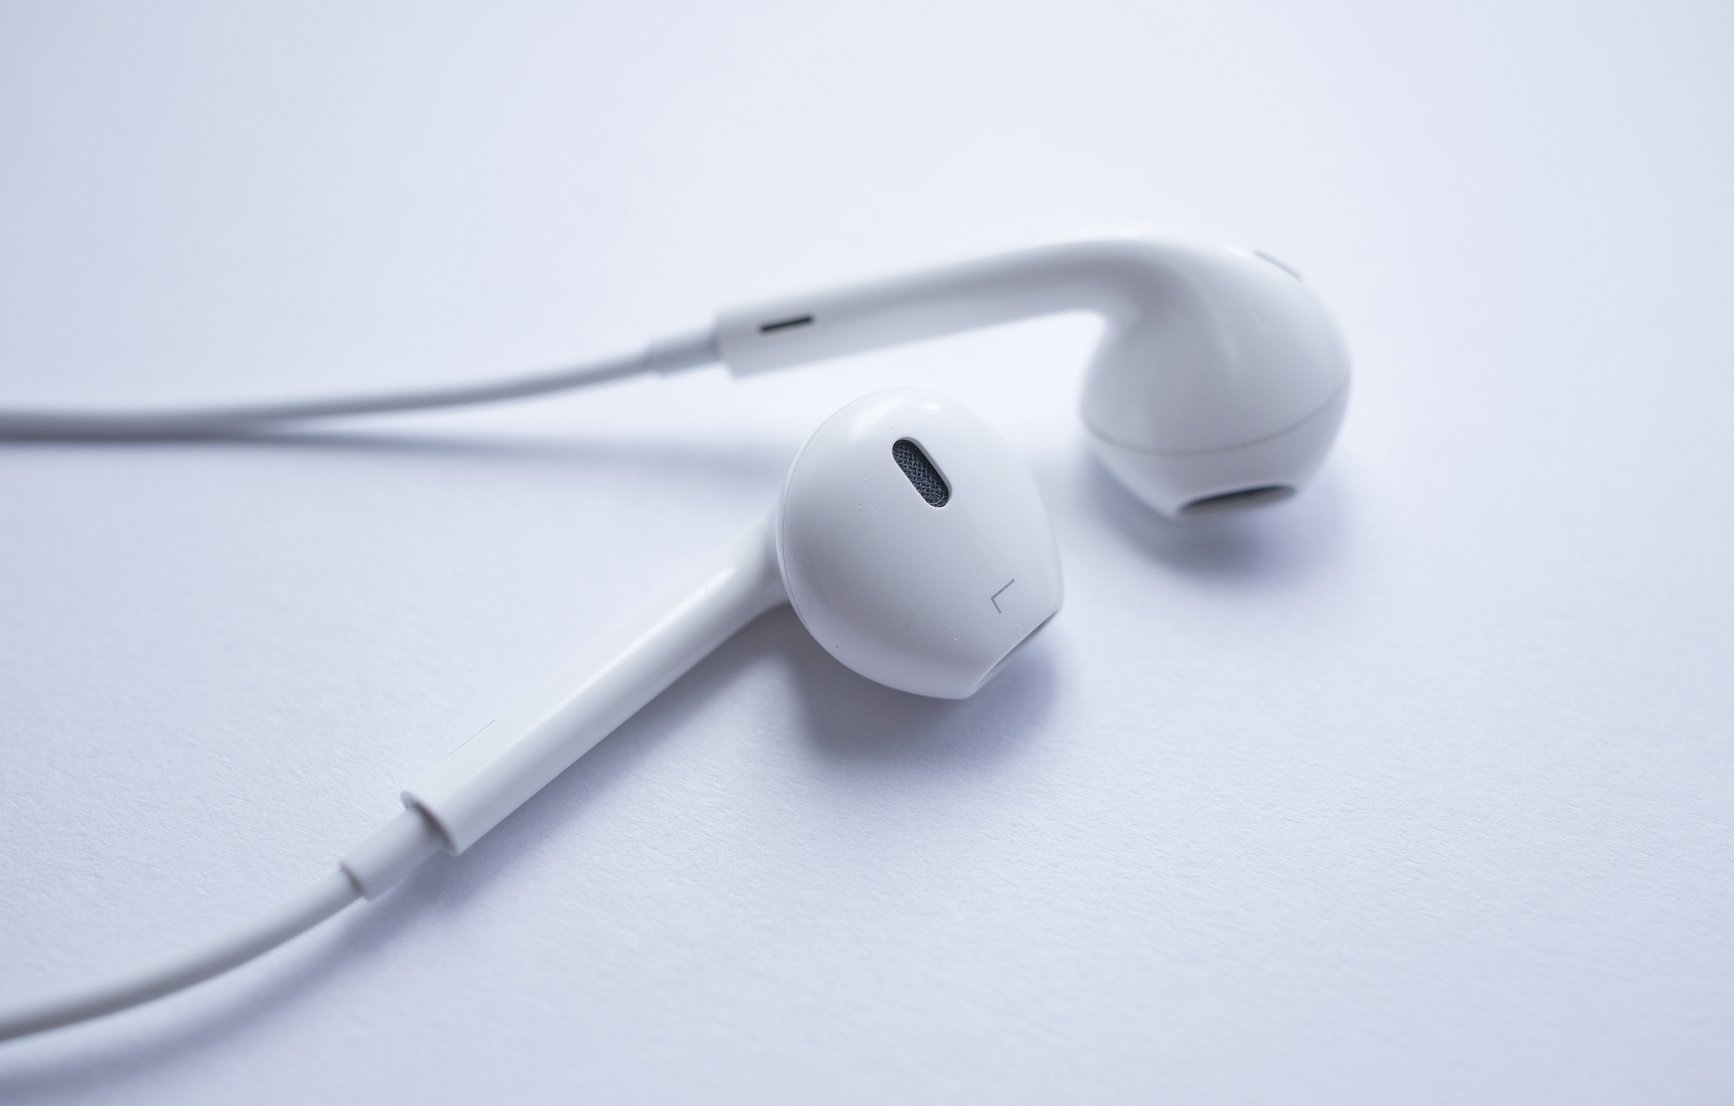 Electronic modern earphones for playing music. Closeup shot of a pair of white earphones isolated on white. Focus is on left earphone.